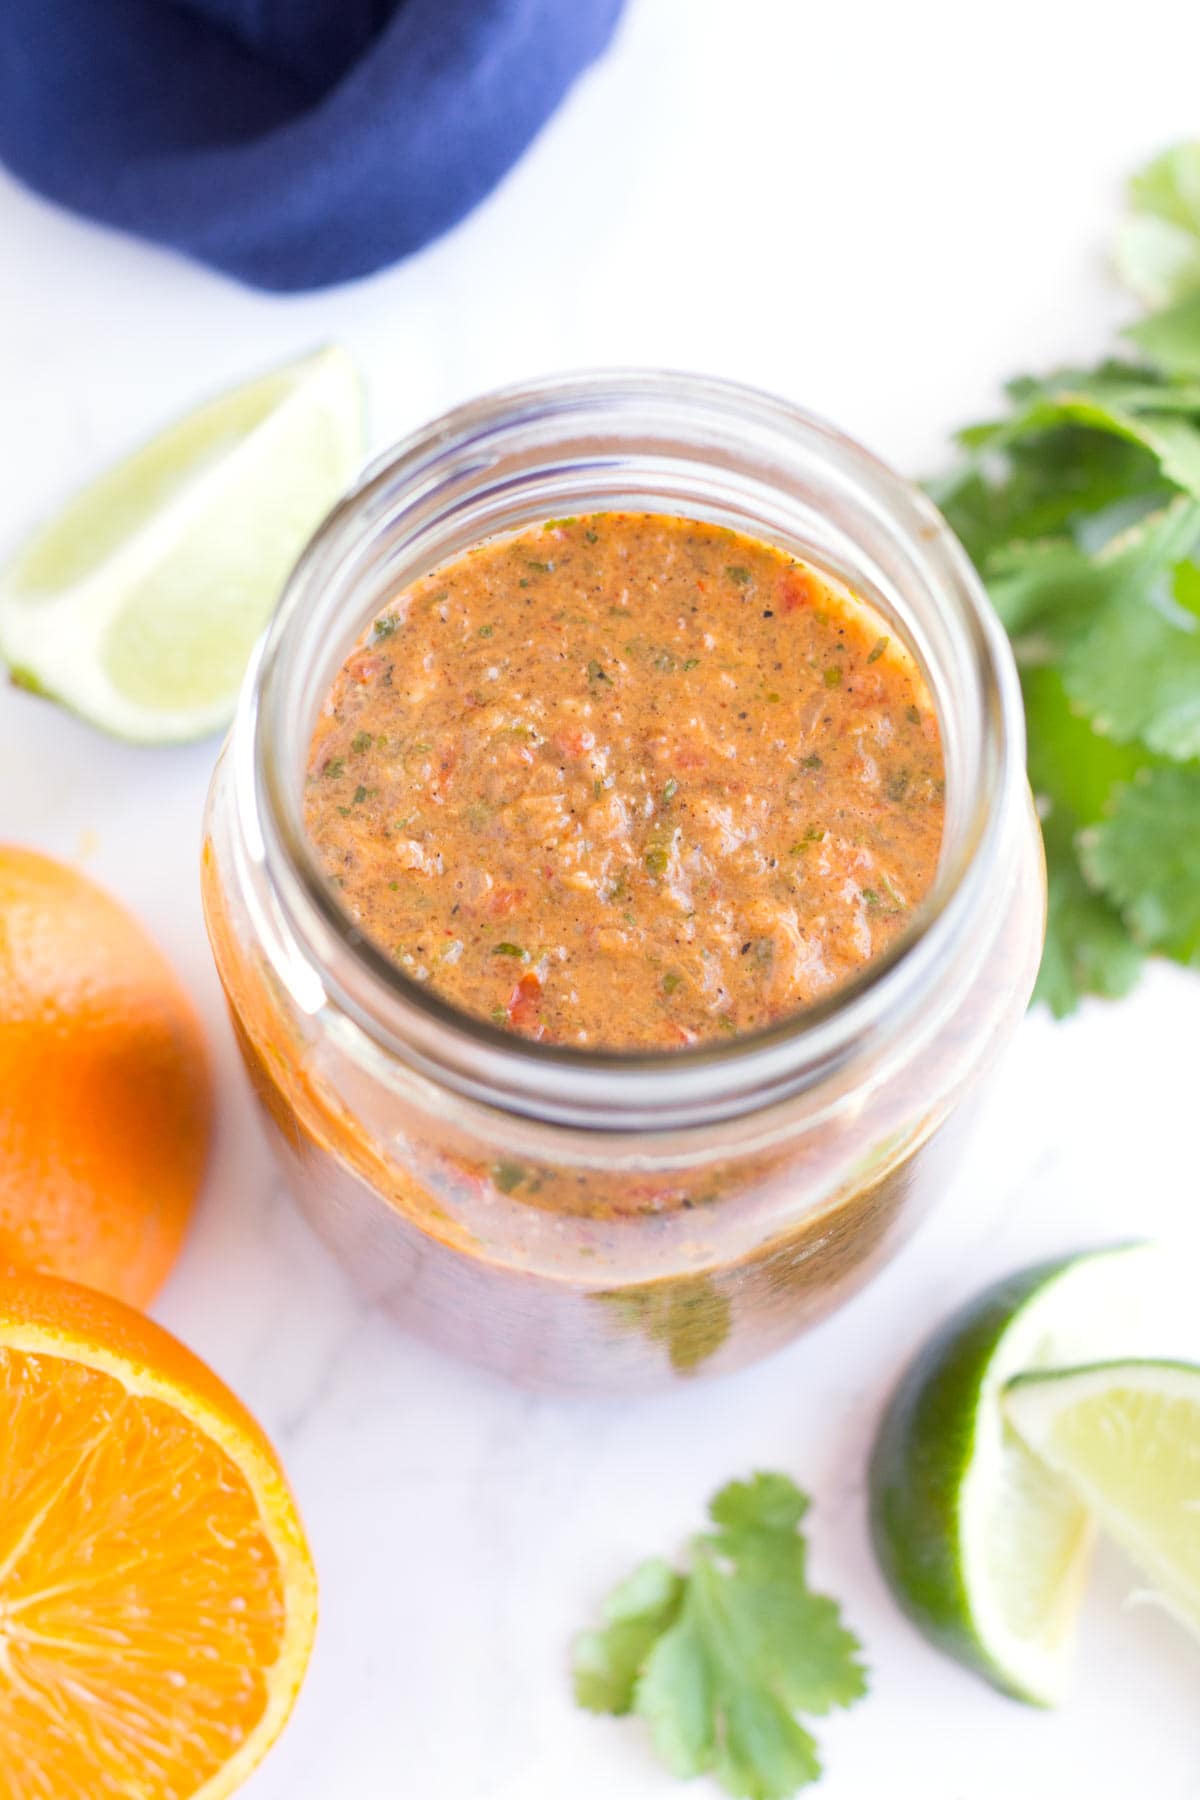 Jar of grilled taco marinade with oranges, limes, and cilantro on the counter